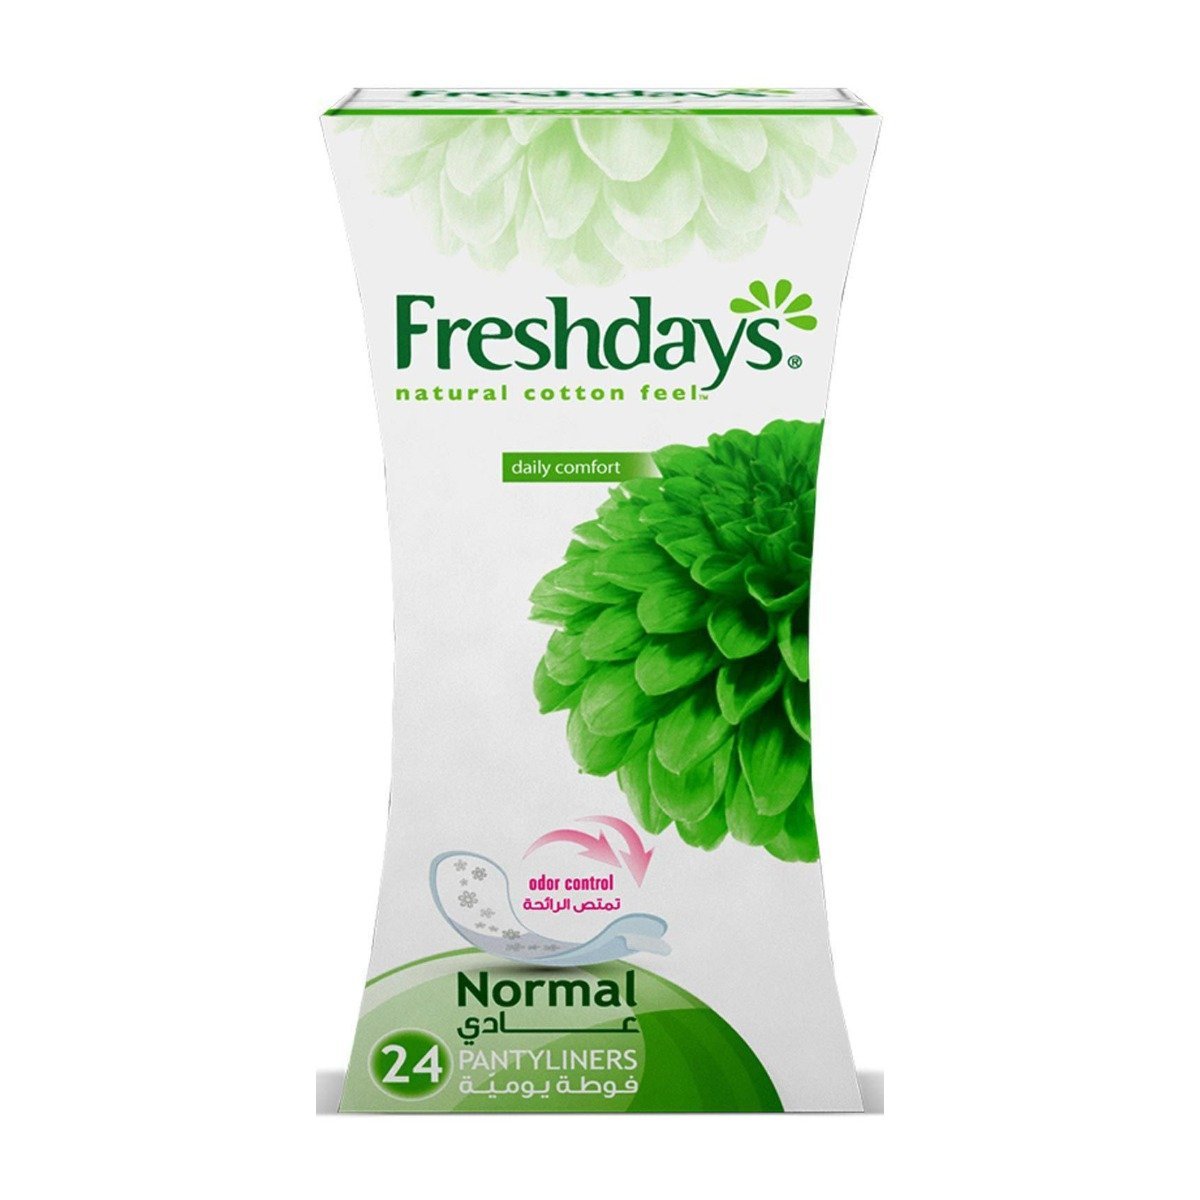 Freshdays Daily Comfort Normal Odor Control - 24 Pantyliners - Bloom Pharmacy